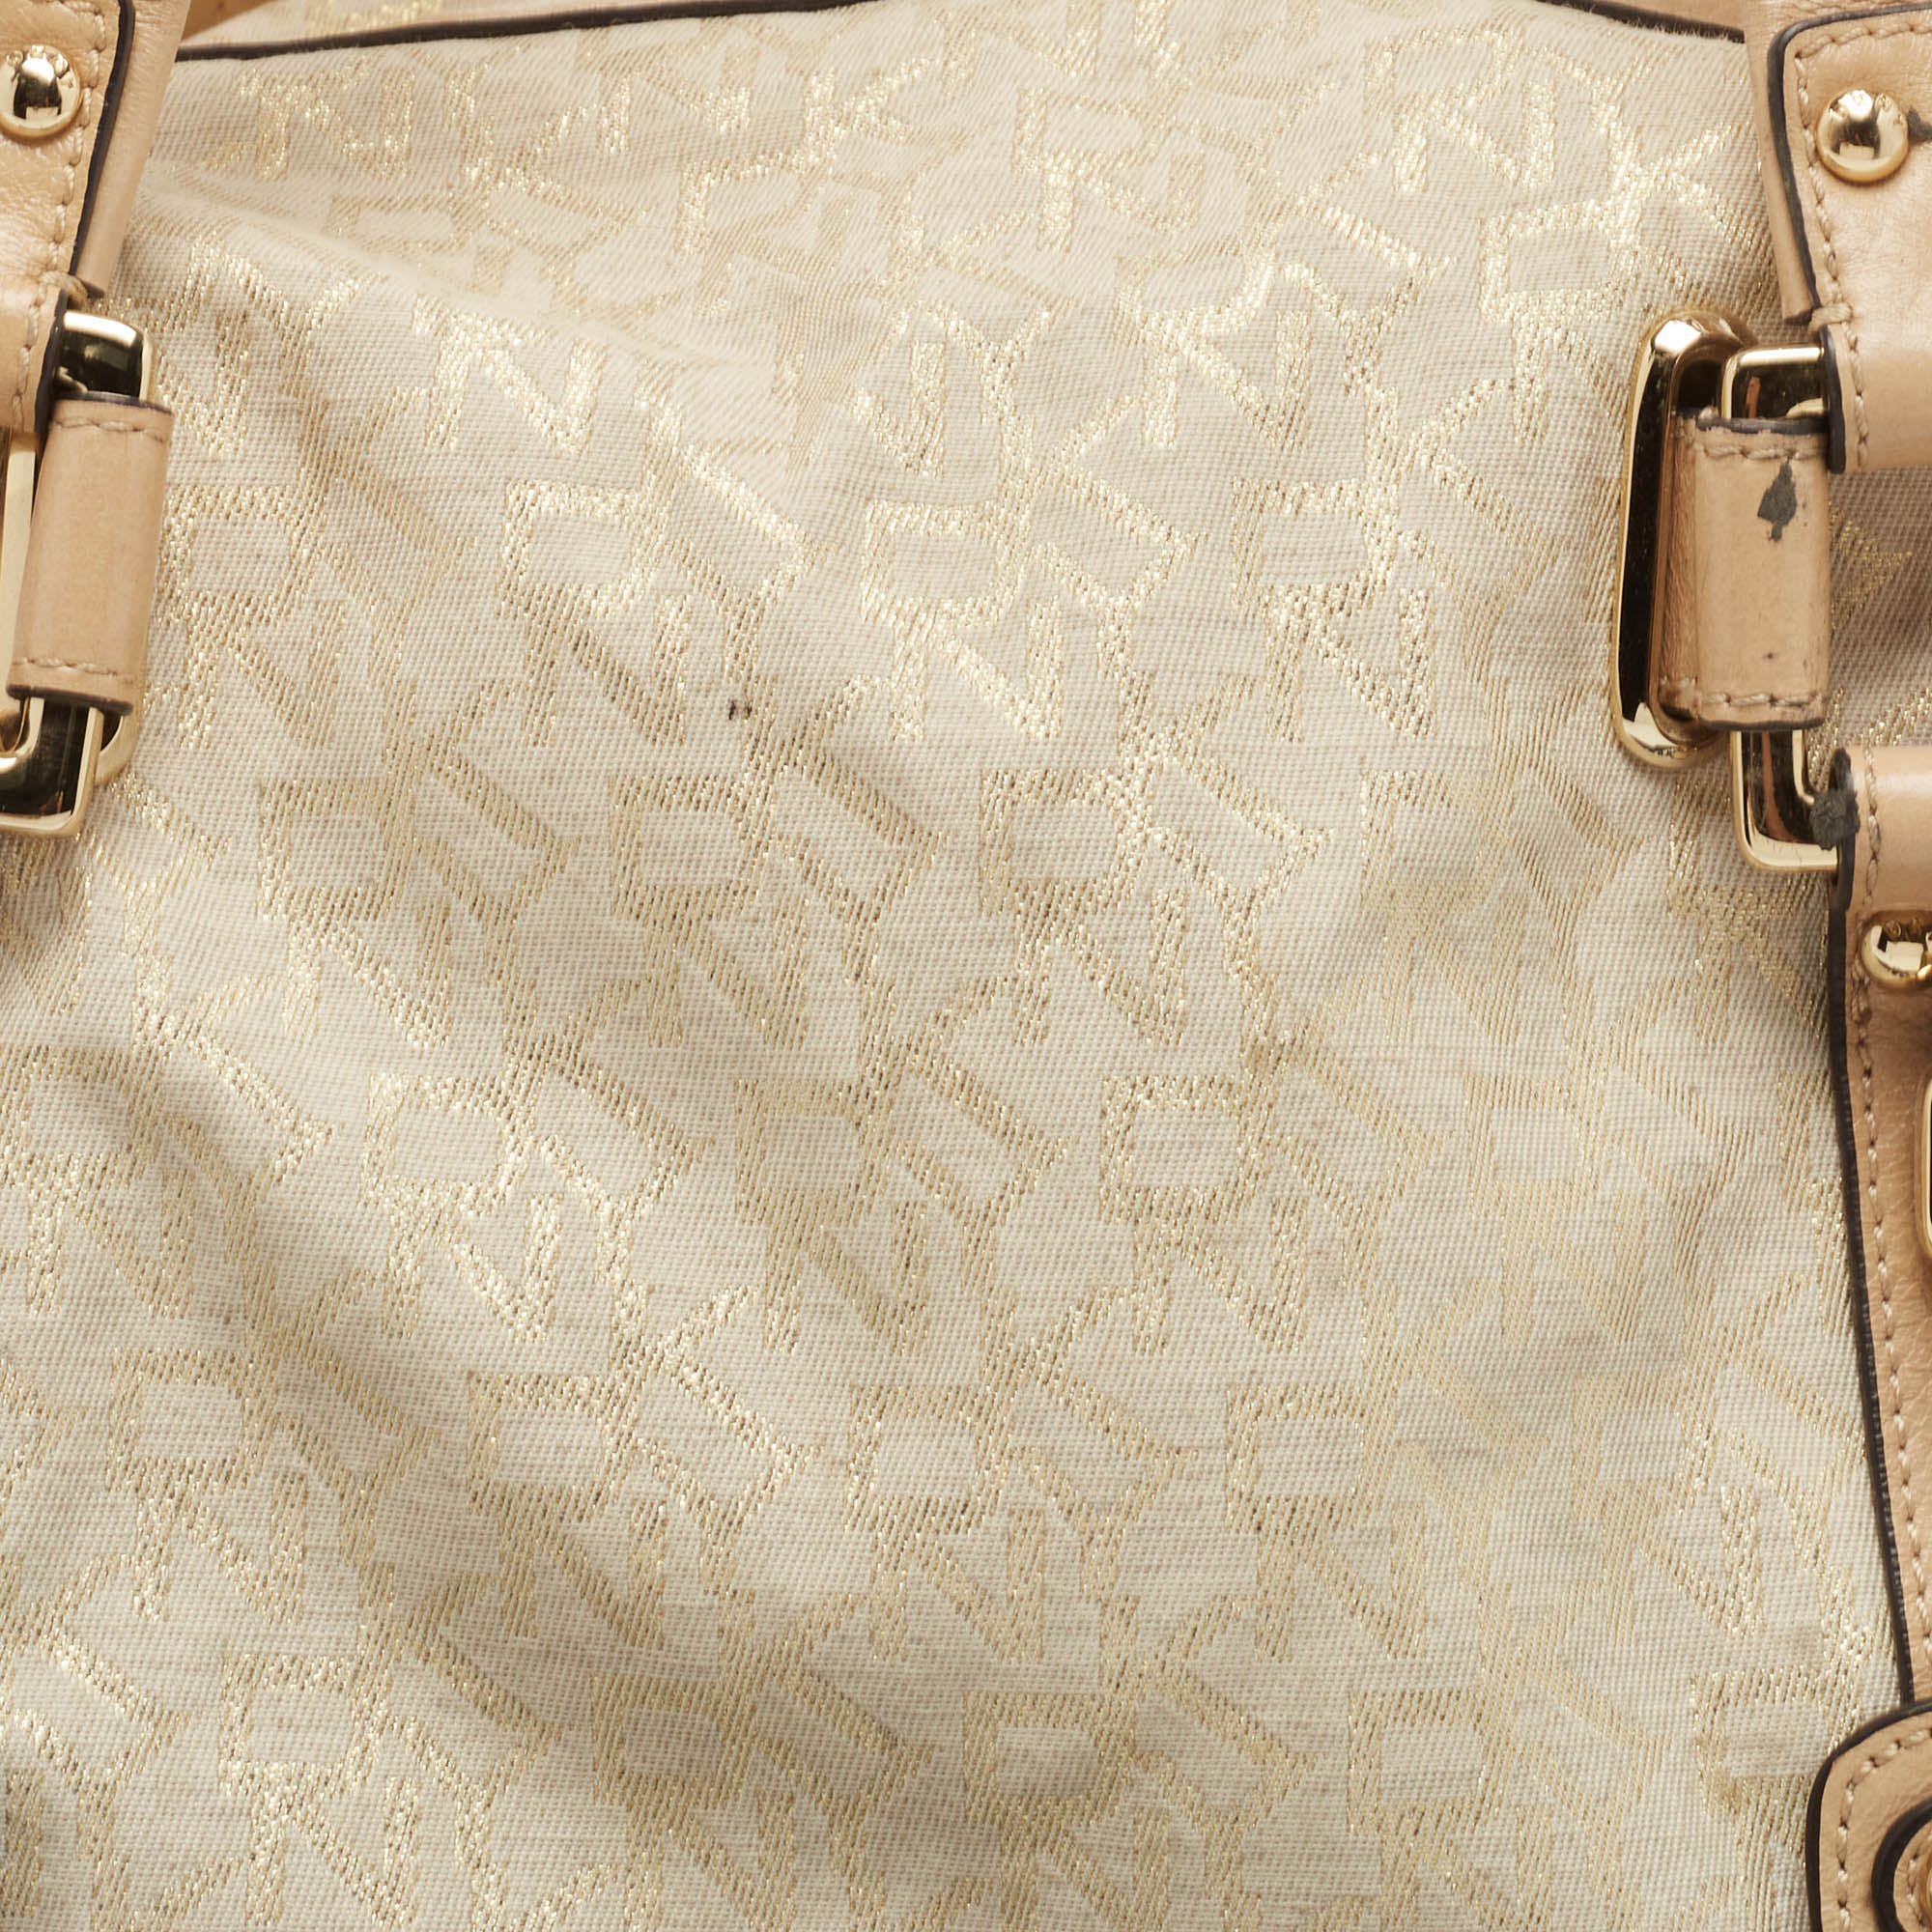 Dkny Beige/Gold Monogram Canvas And Leather Buckle Satchel